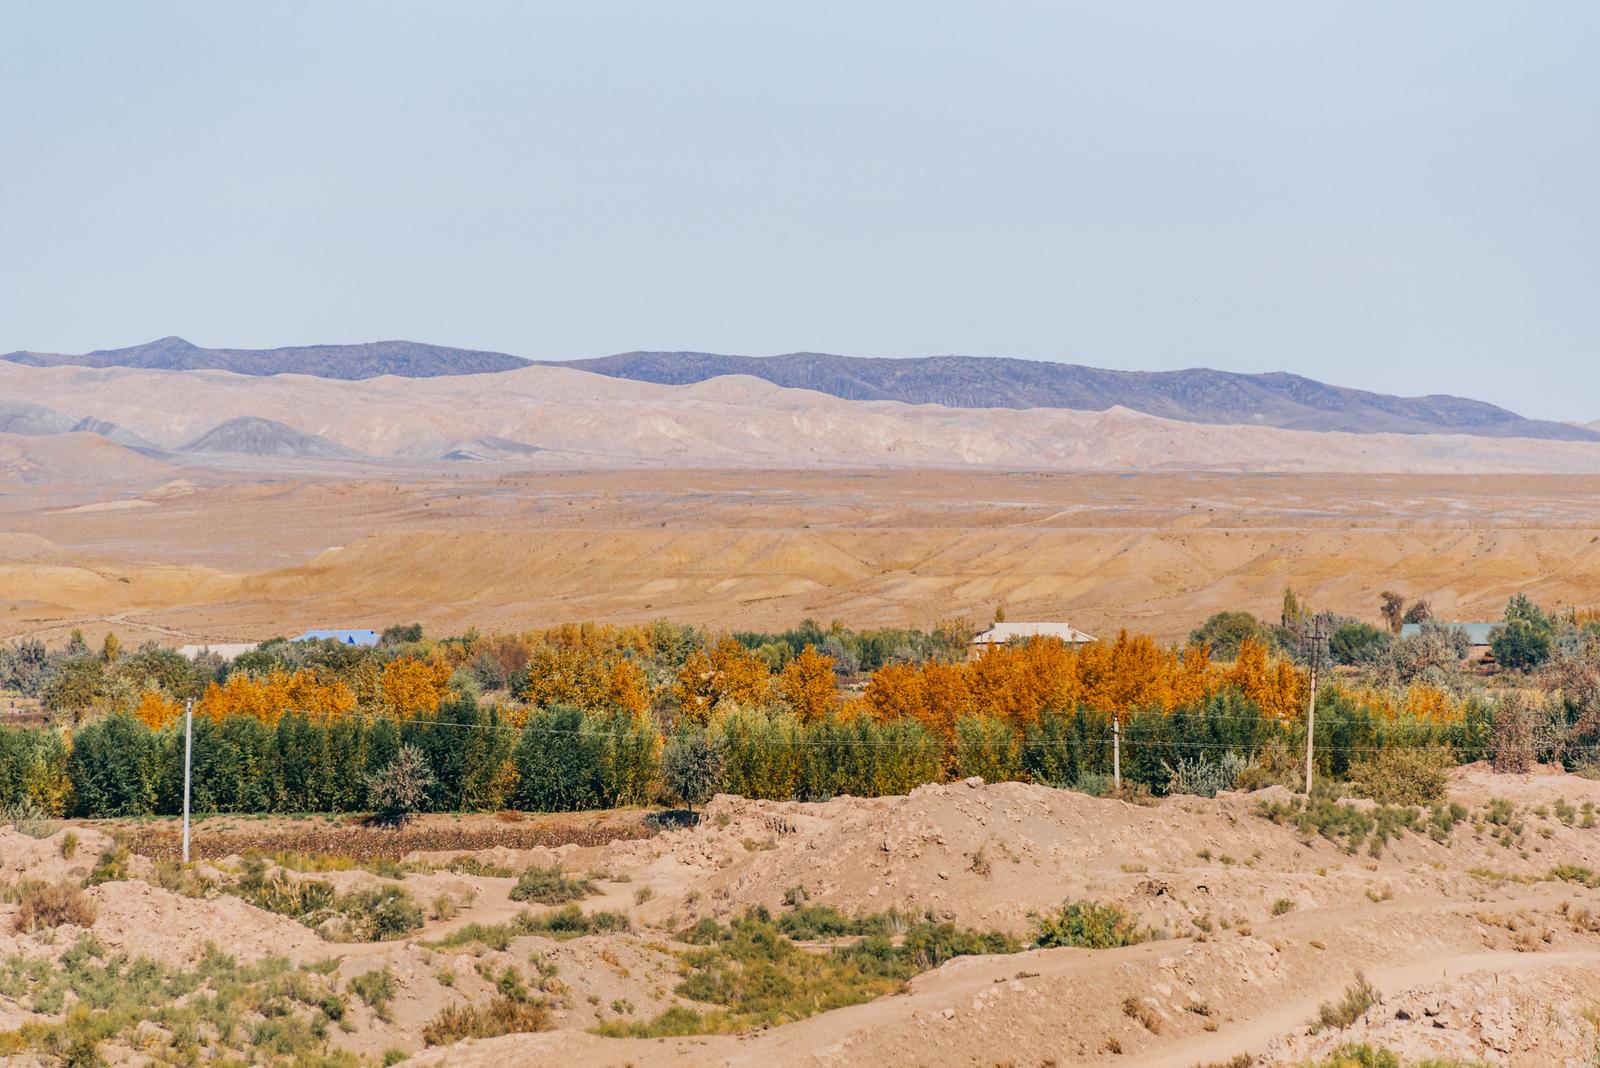 The Yellow Hues of the Autumn in the Desert